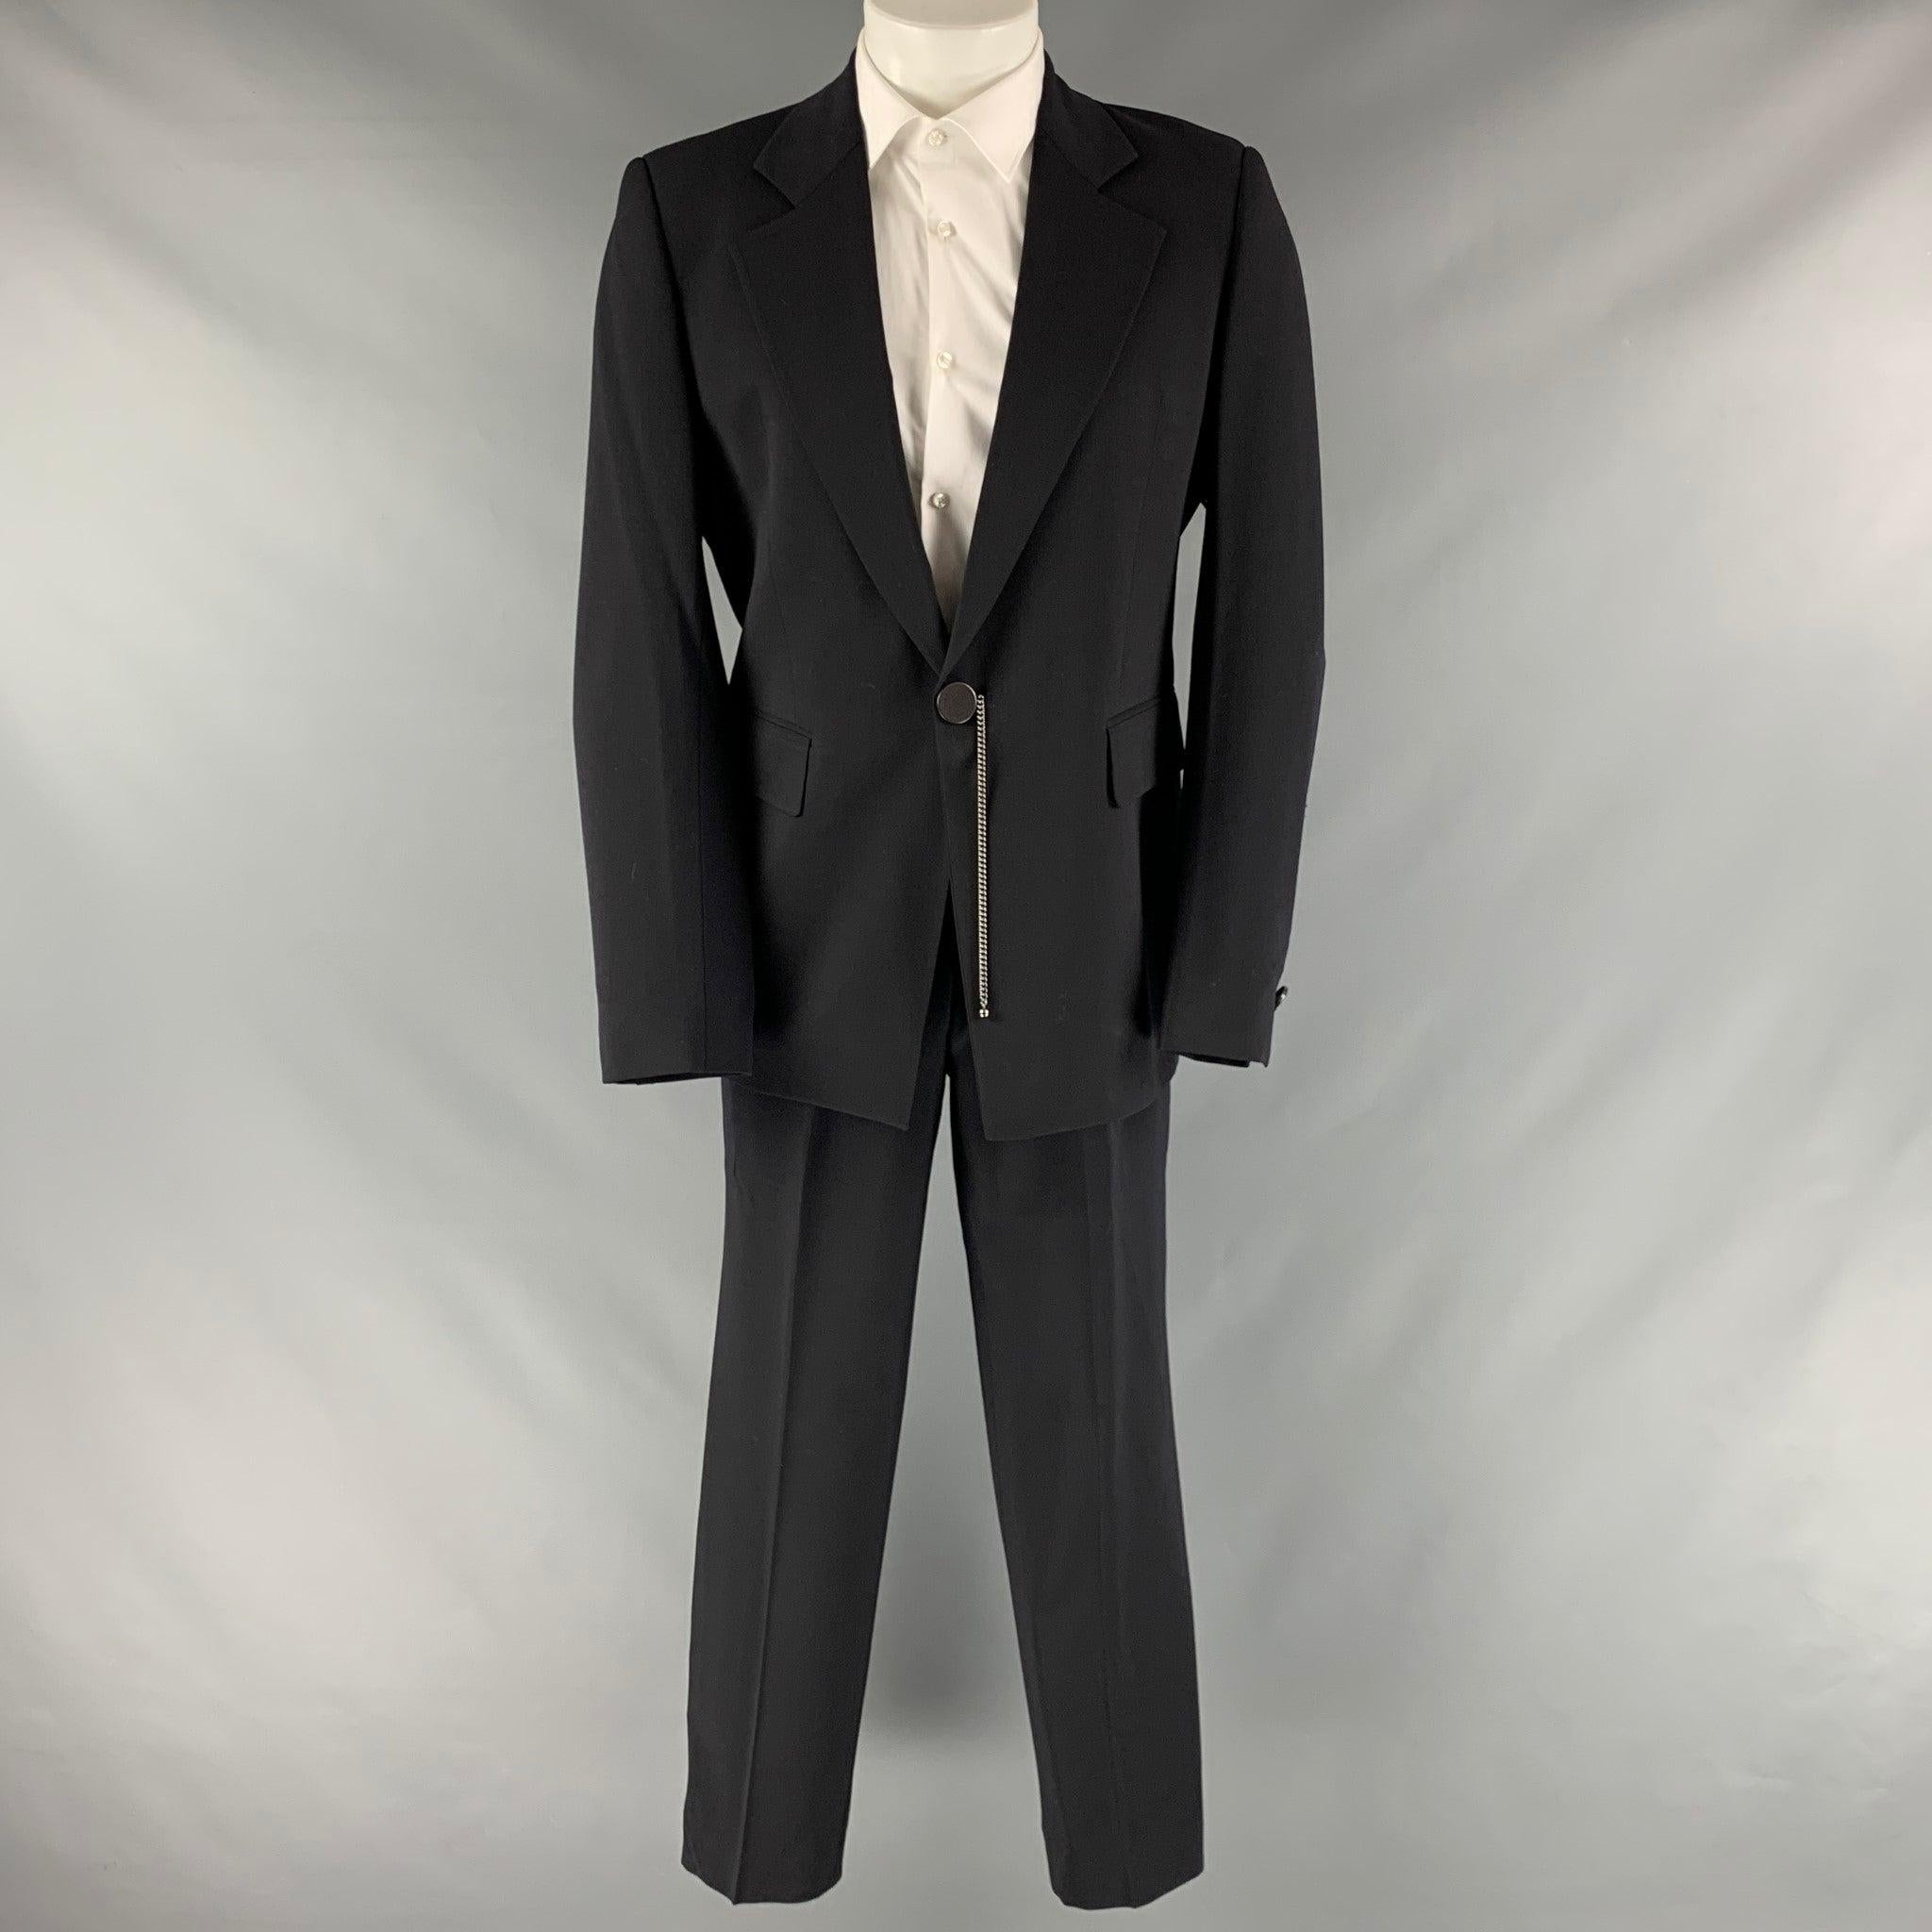 DIRK BIKKEMBERGS  Size 40 Black Solid Wool  Elastane Notch Lapel Suit In Good Condition For Sale In San Francisco, CA